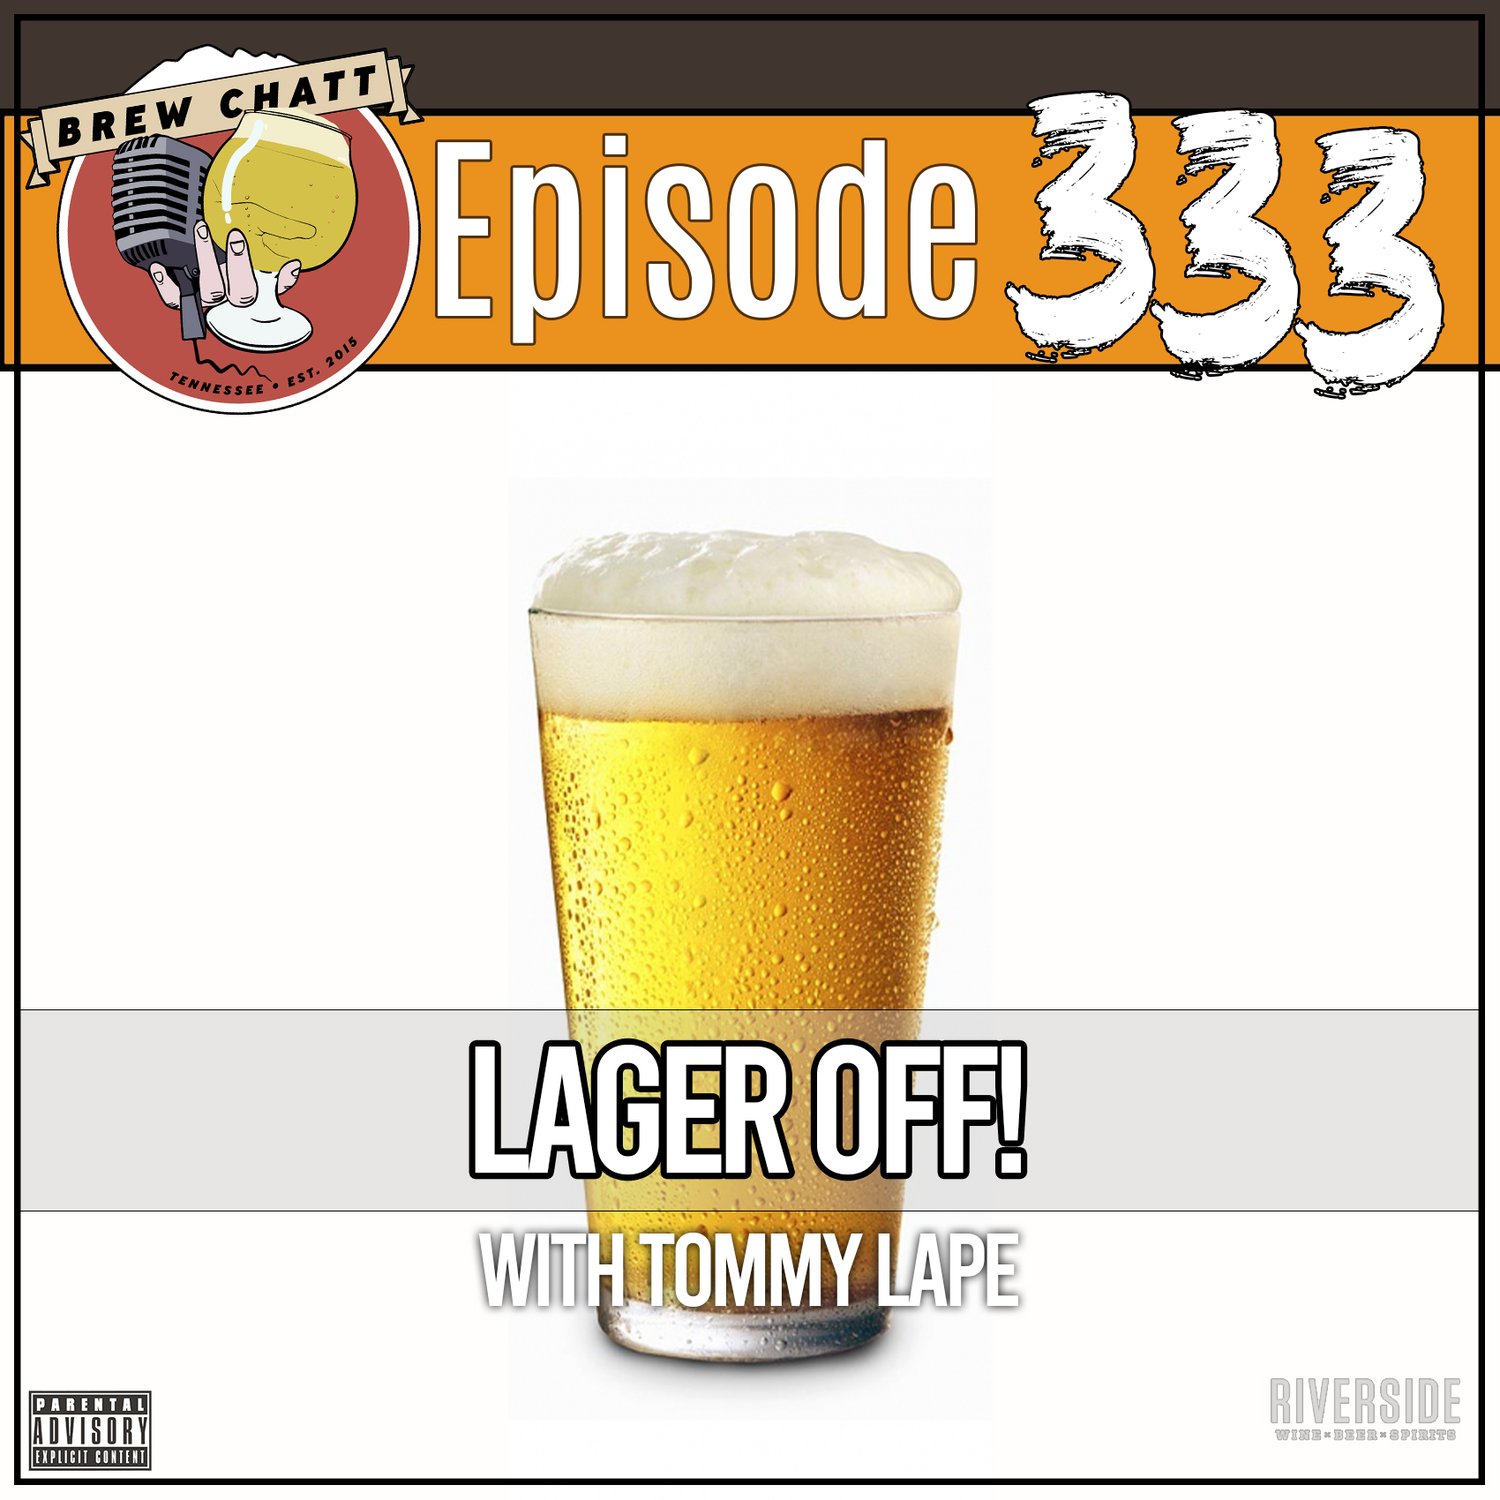 Episode 333 - Lager Off! with Tommy Lape